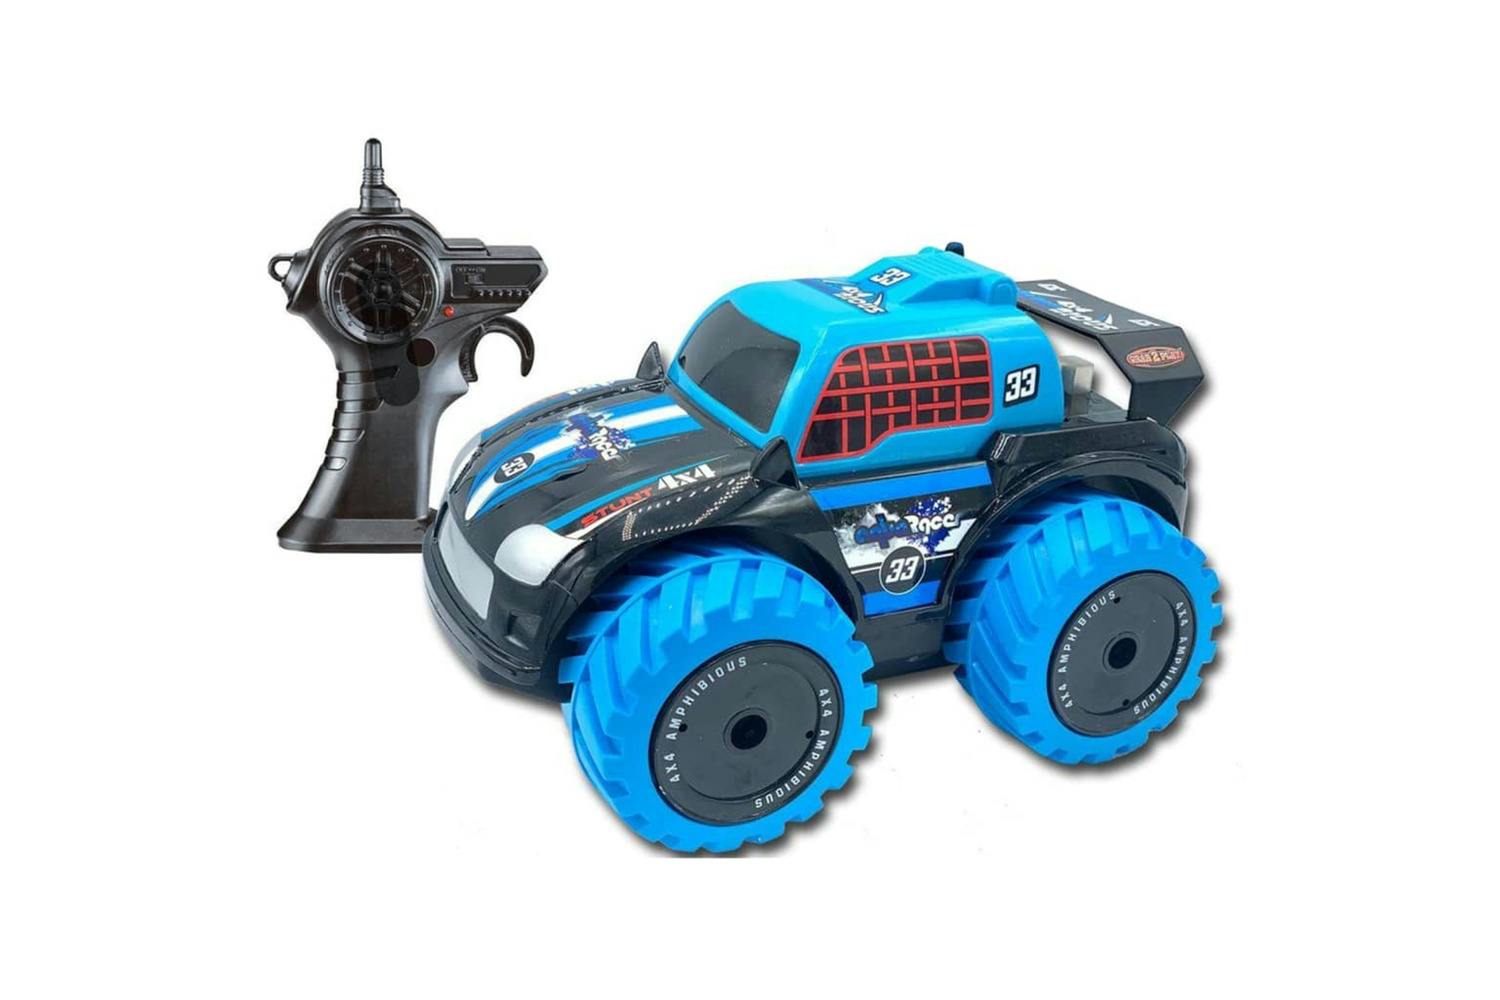 Gear2play 439700 2-in-1 Radio-controlled Toy Land Vehicle Aqua Racer Blue